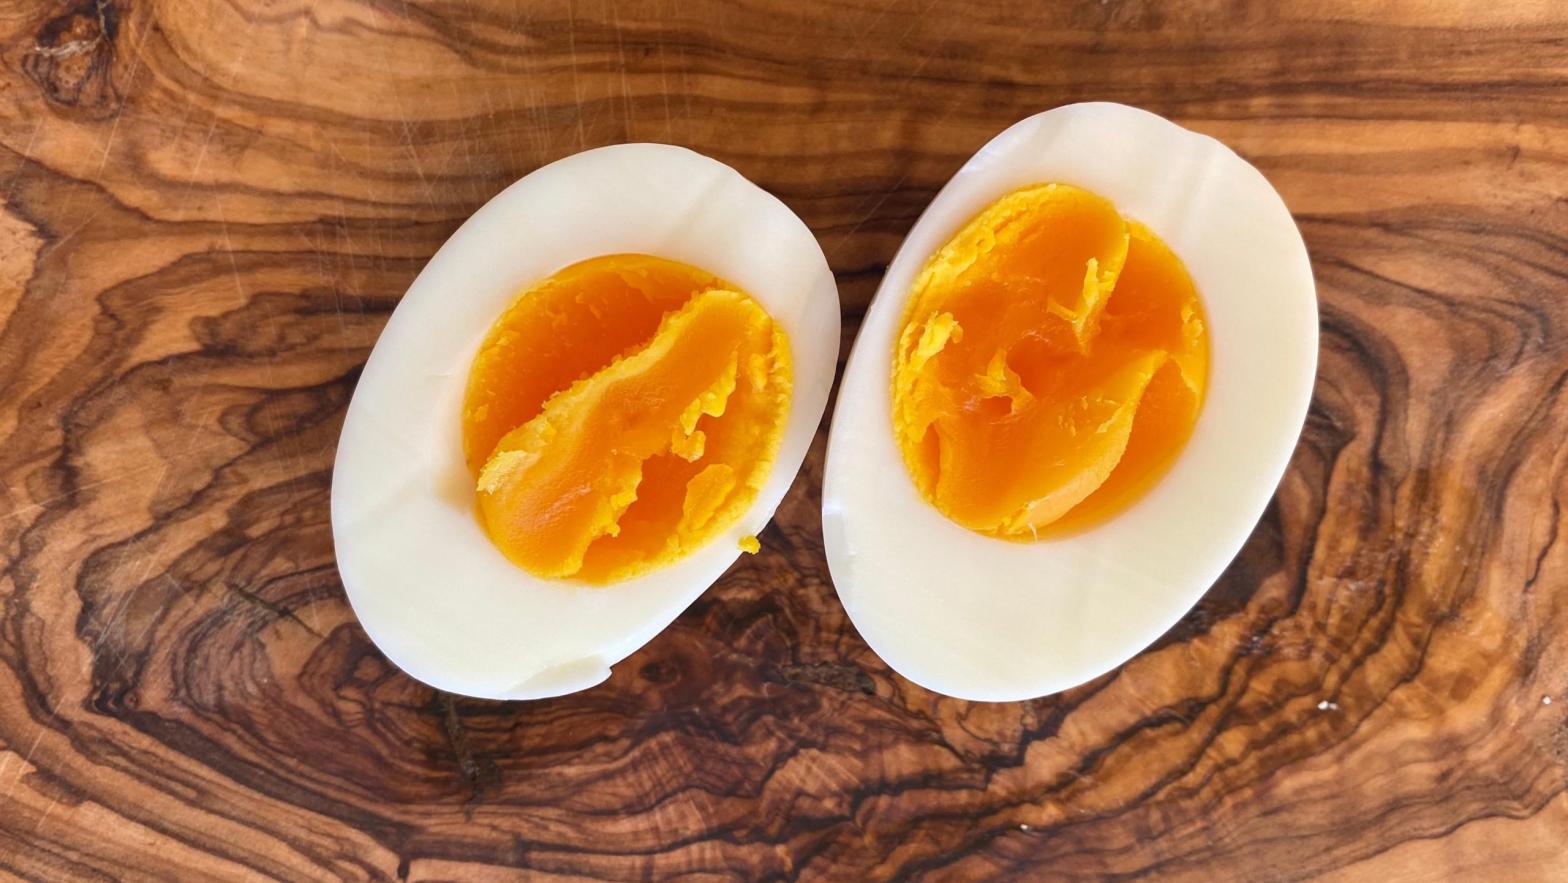 This is the ideal hard boiled egg. You may not like it, but this is what peak yolk doneness looks like. (Photo: Claire Lower)